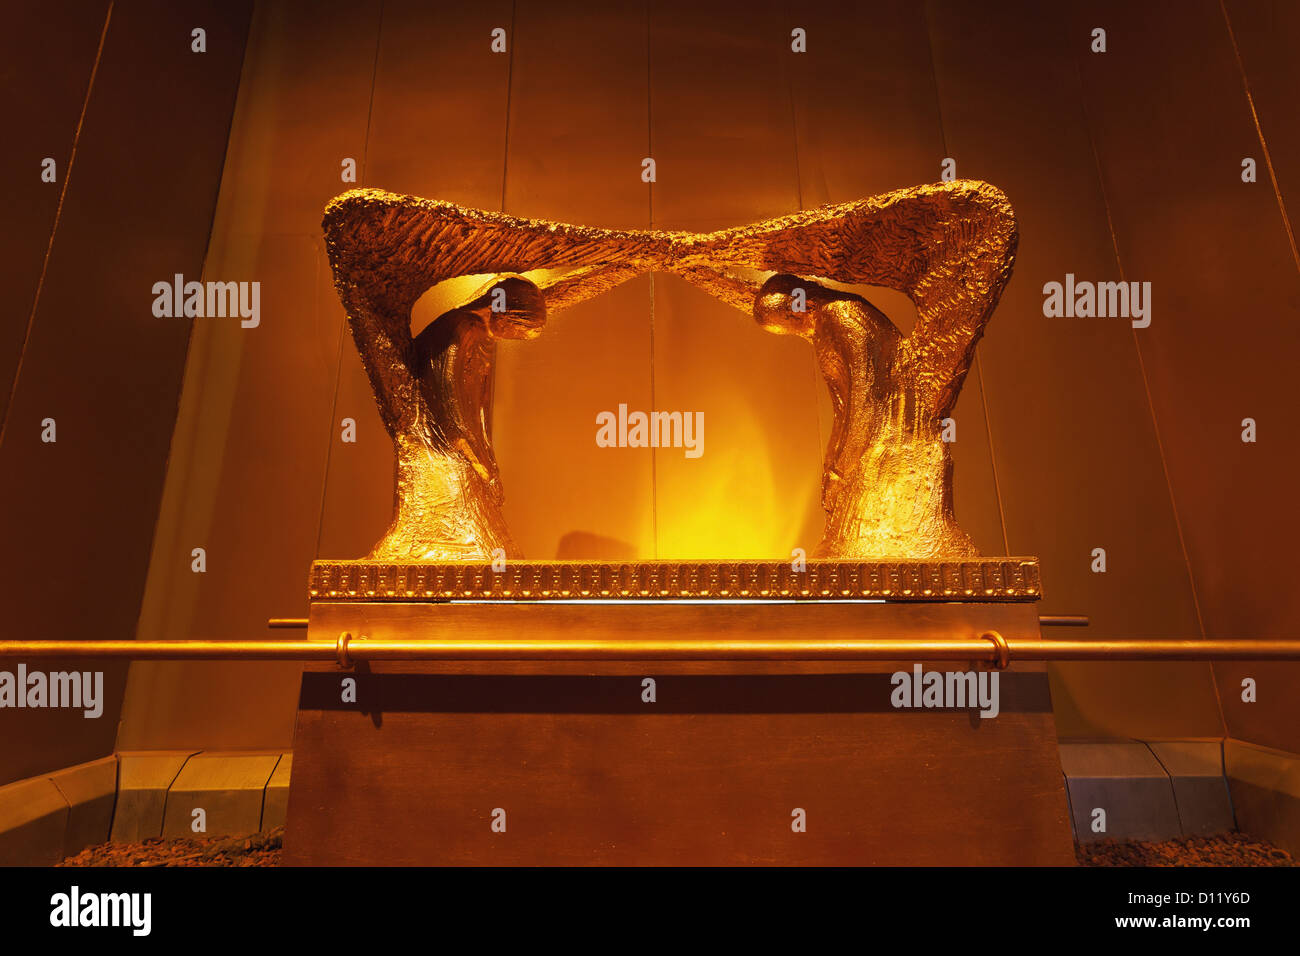 Replica Of The Gold Cherubim On The Ark Of The Covenant; Timna Park Arabah Israel Stock Photo